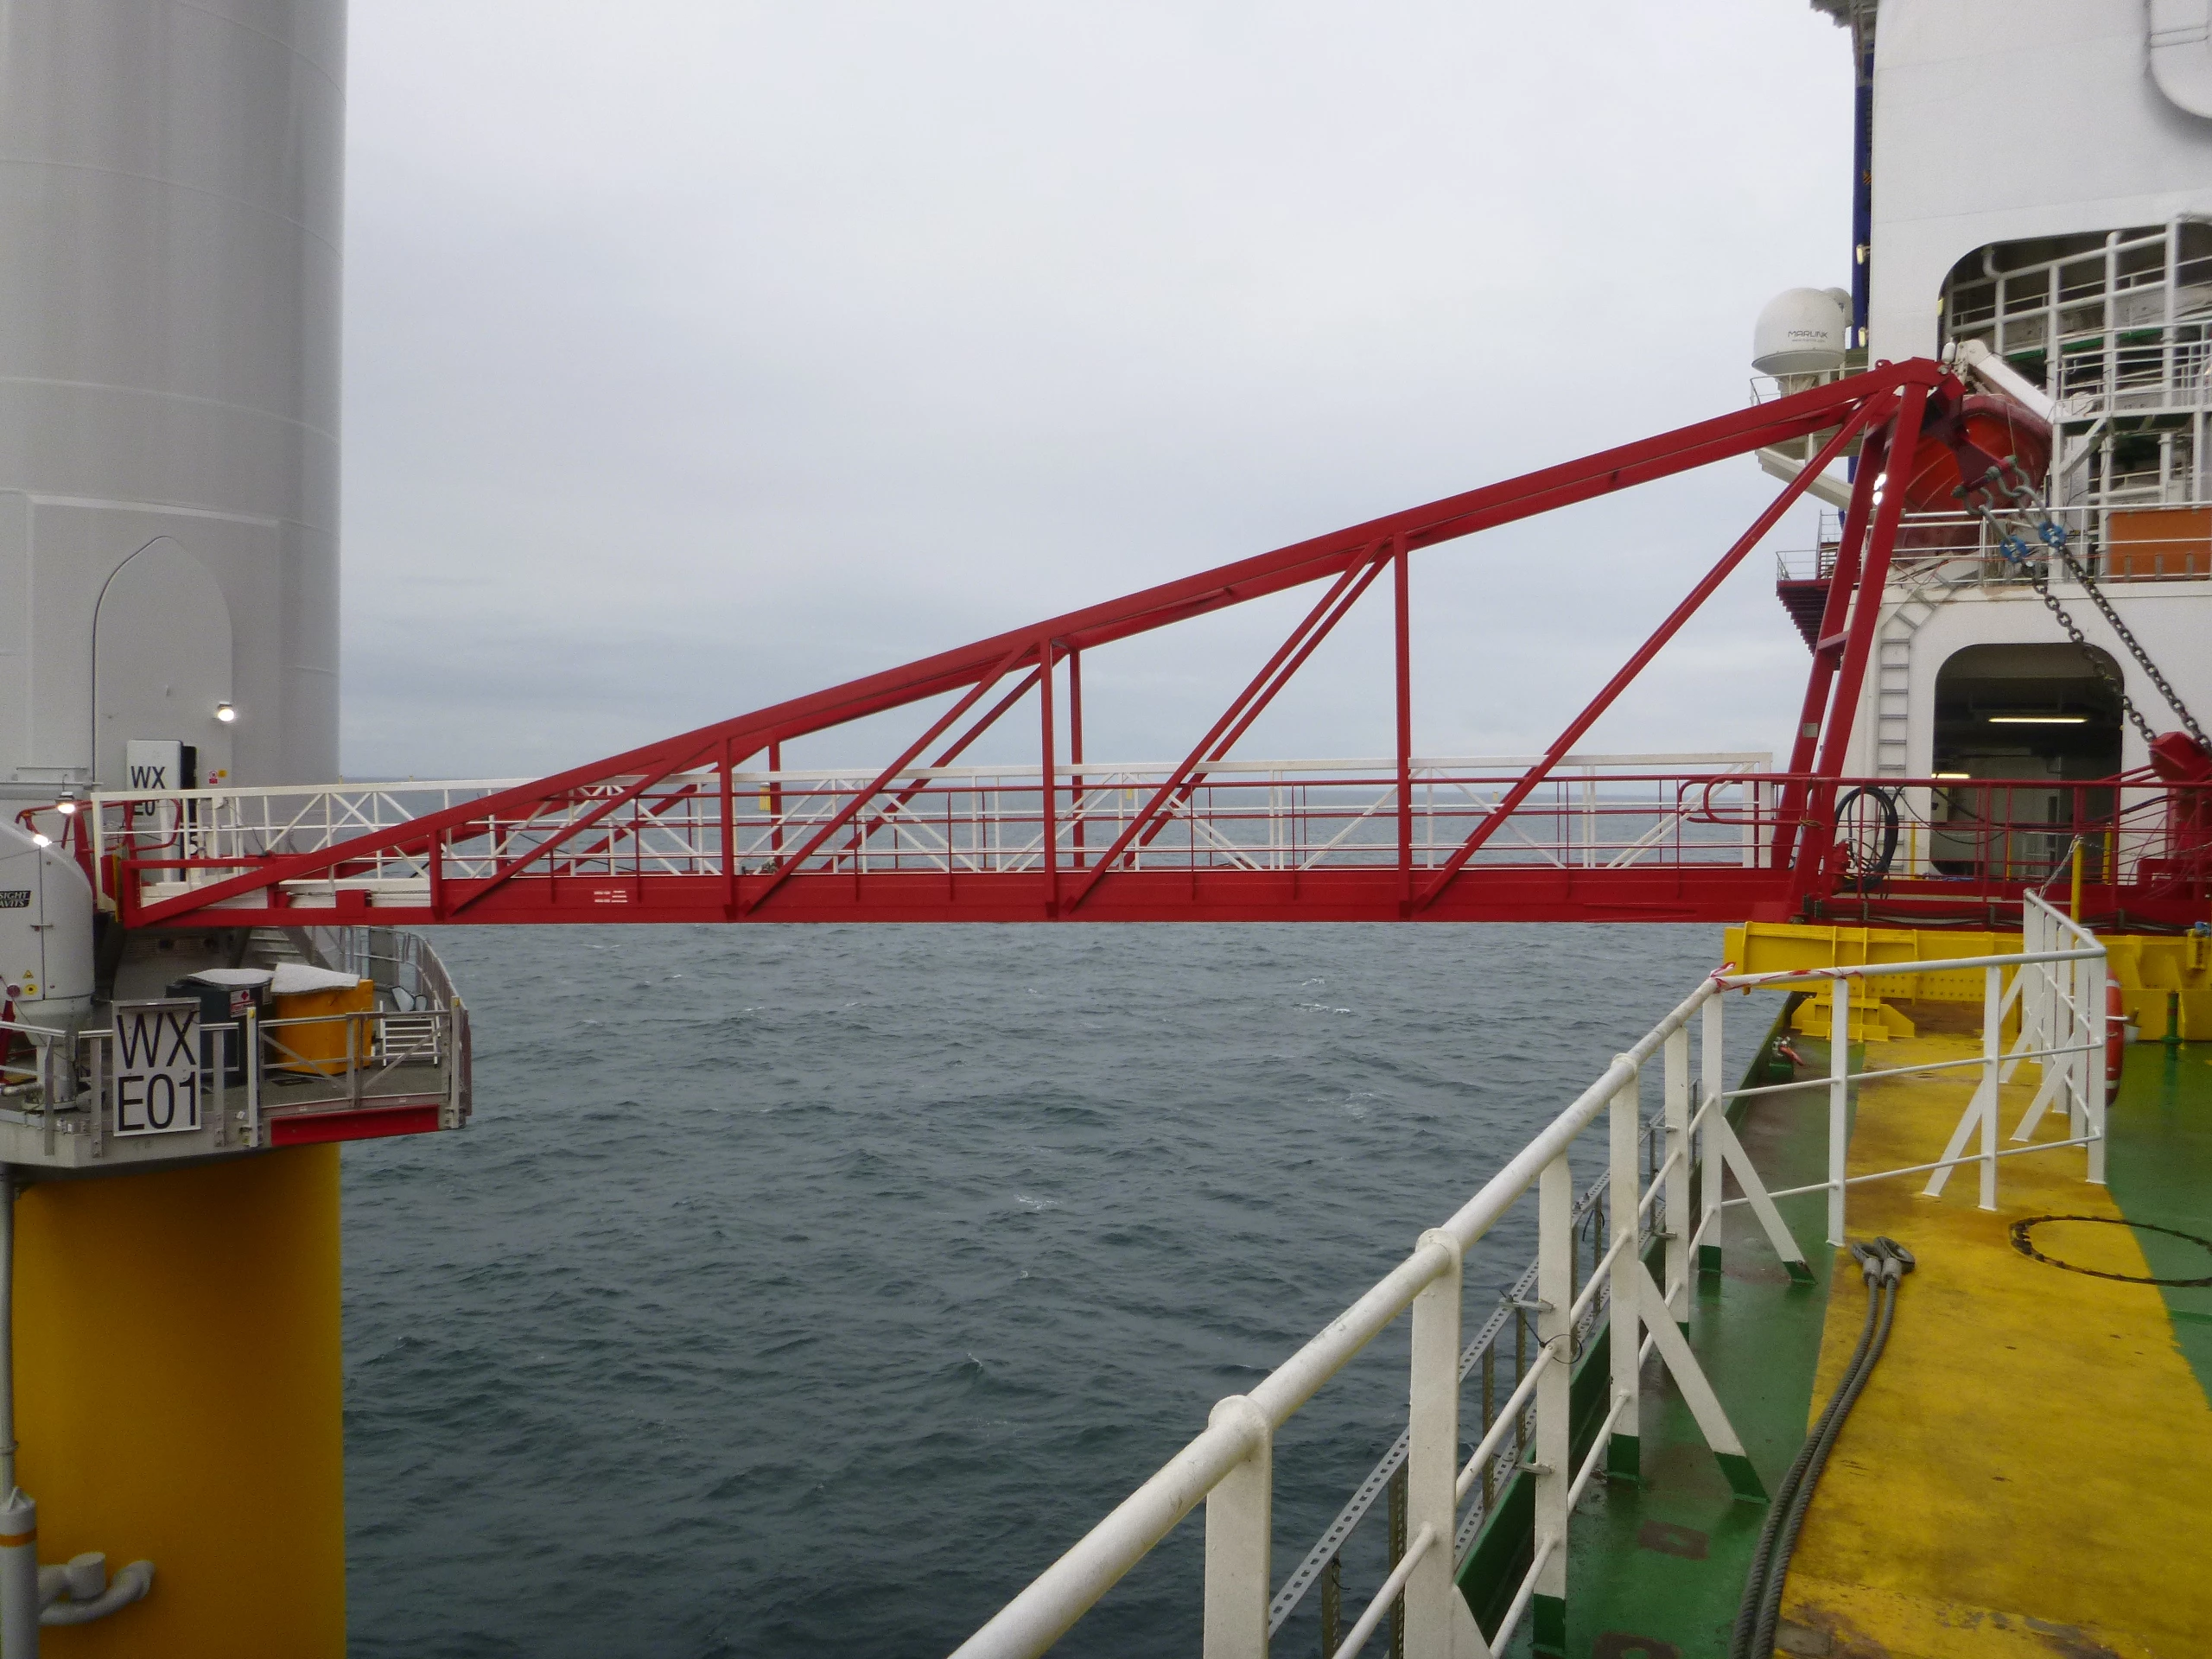 Osbit’s gangway in operation on board the Seajacks Scylla at the DONG Energy Walney Extension Offshore wind farm development in the Irish Sea